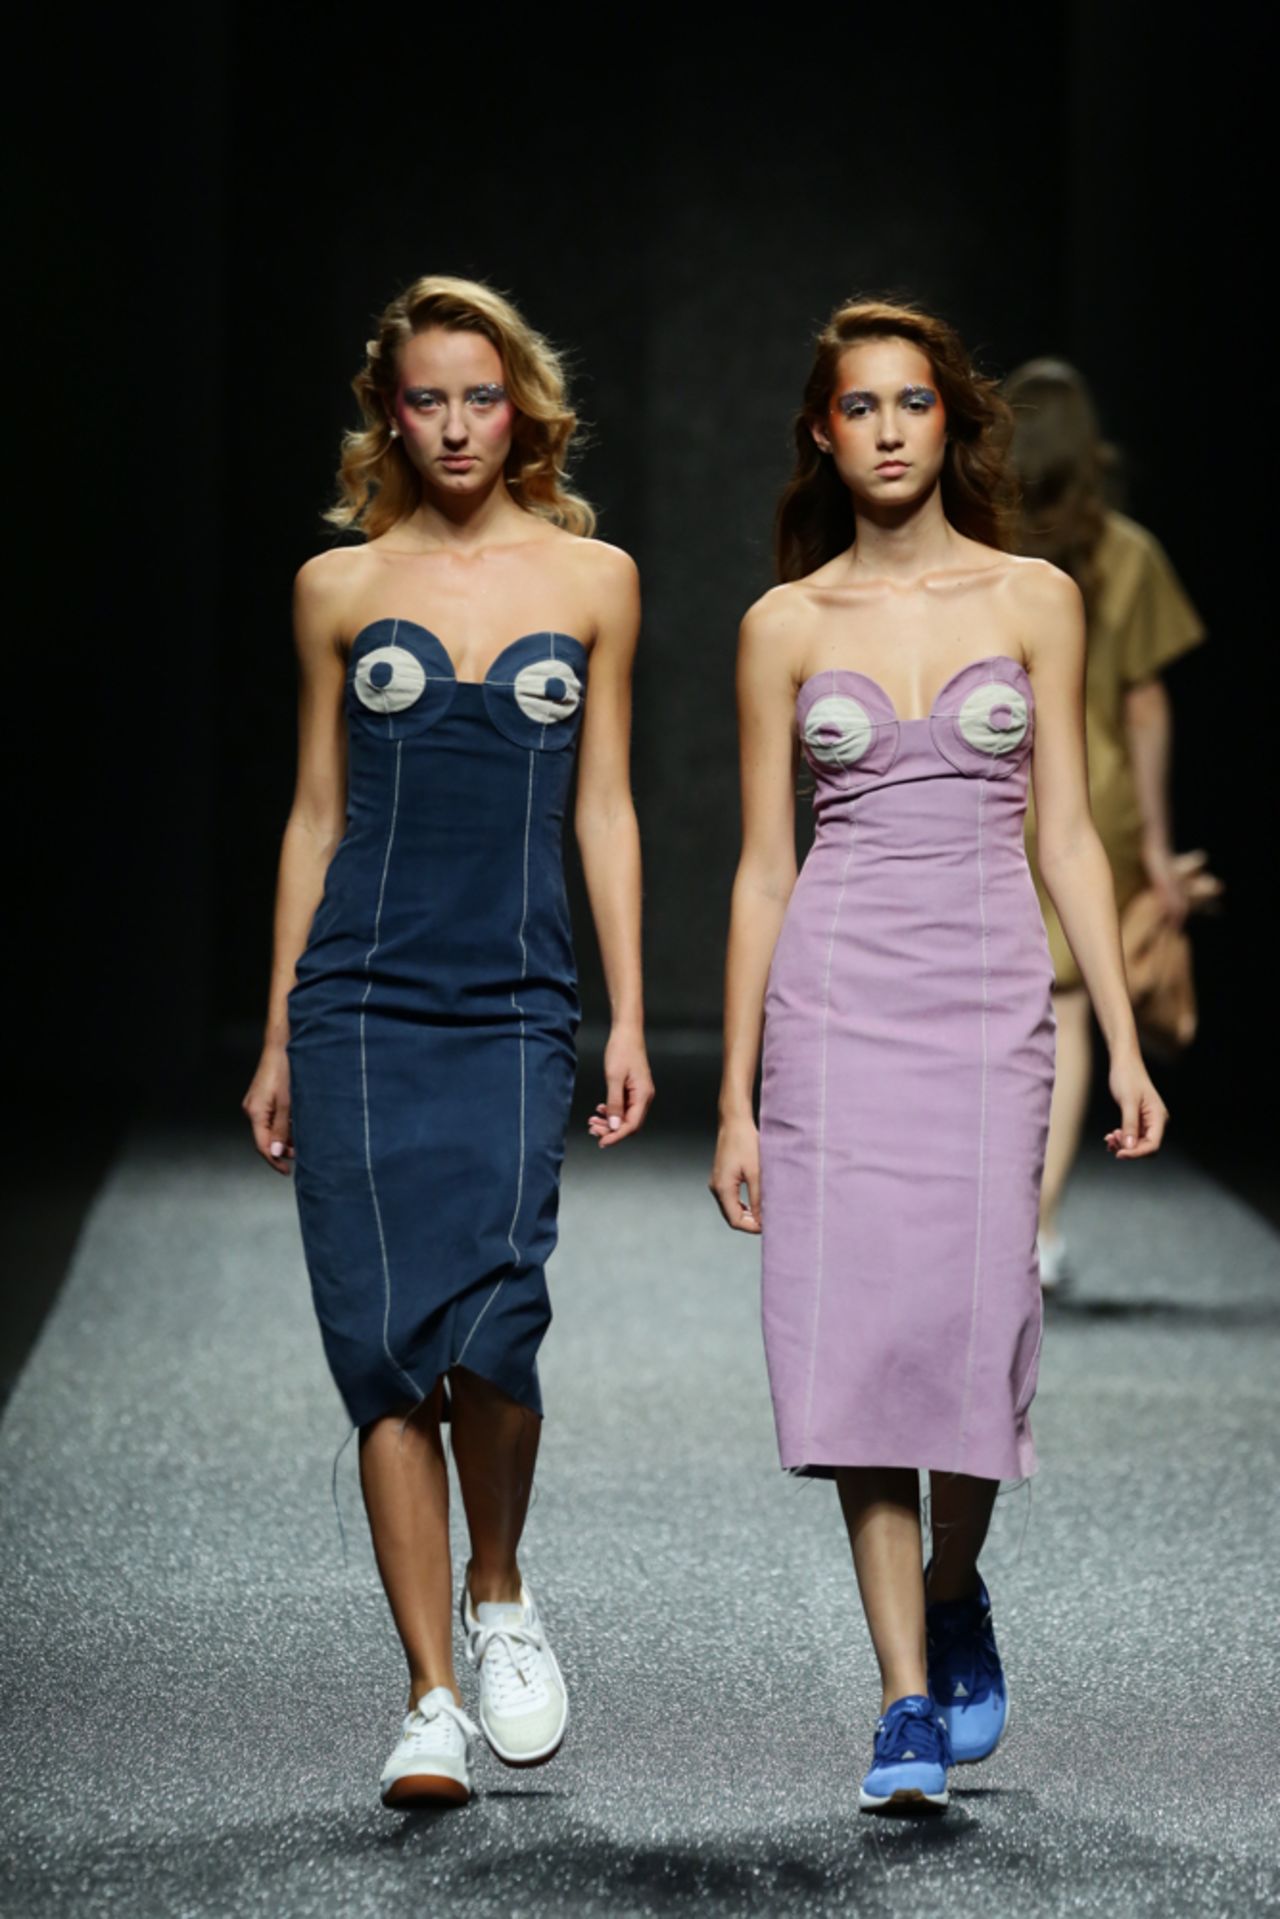 The collection showed practical yet fun outfits, like these denim bustier dresses paired with sneakers.